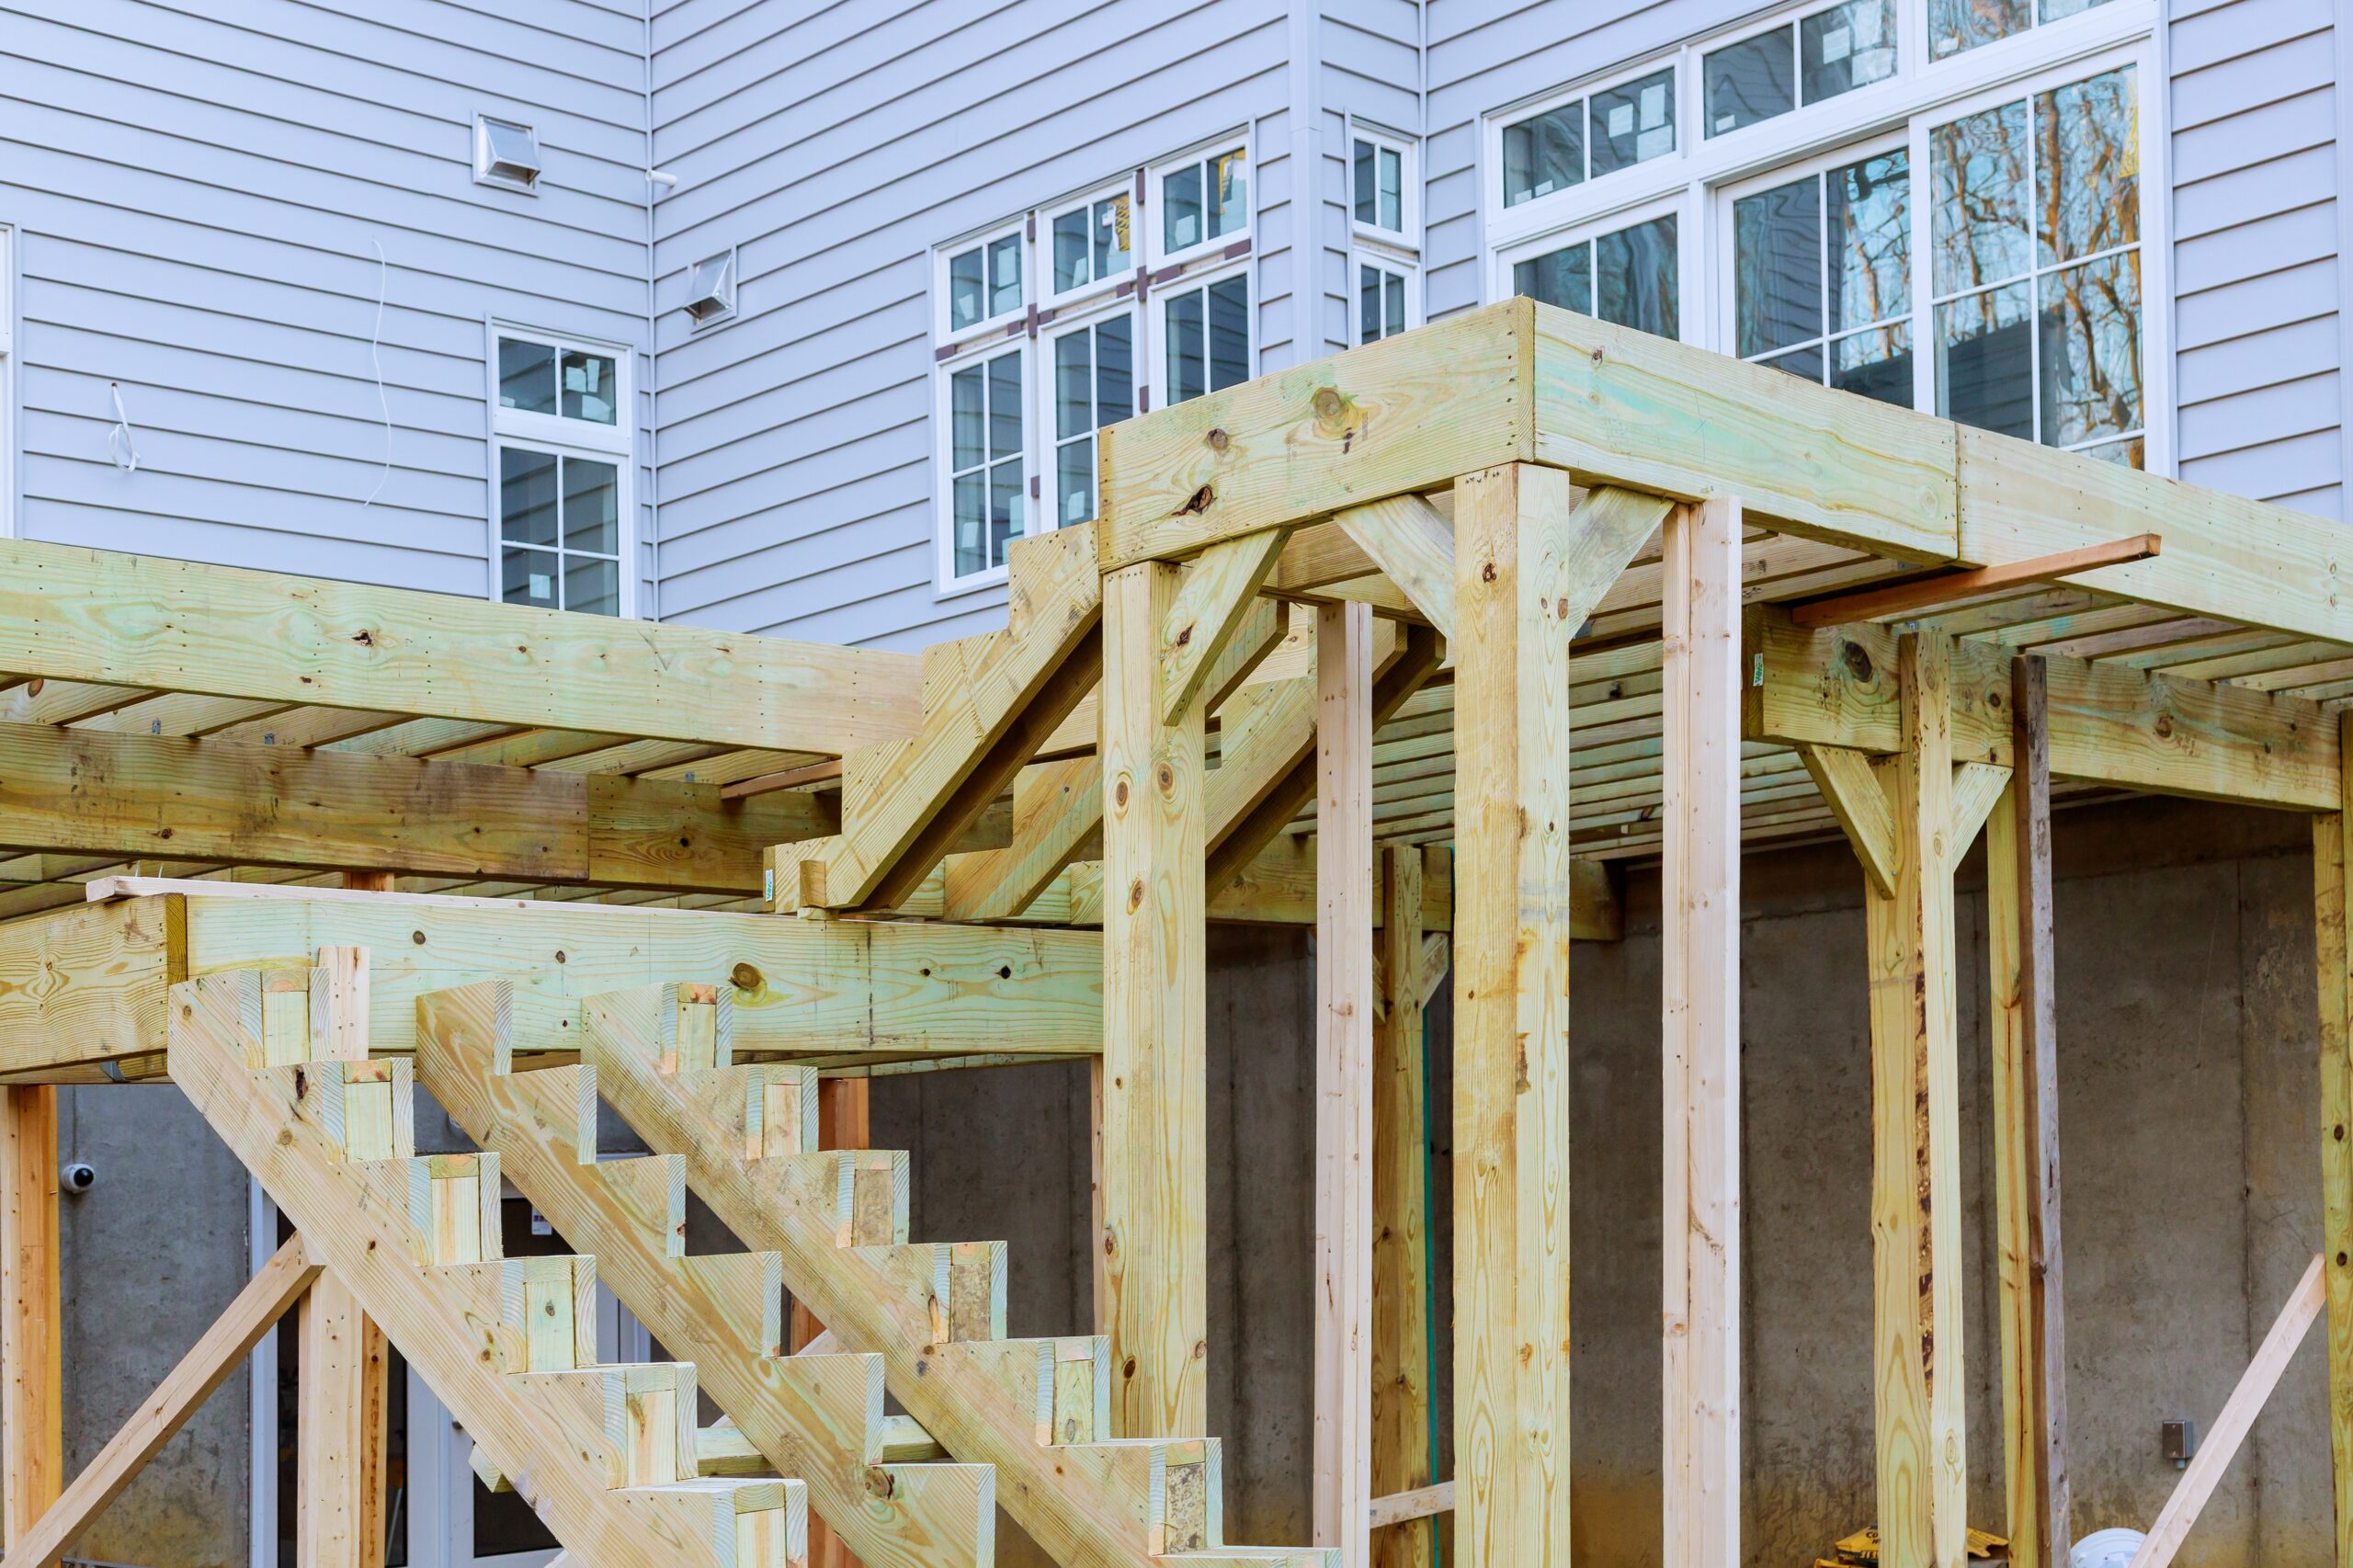 Meeting Safety Standards: Residential Stairs Inspections